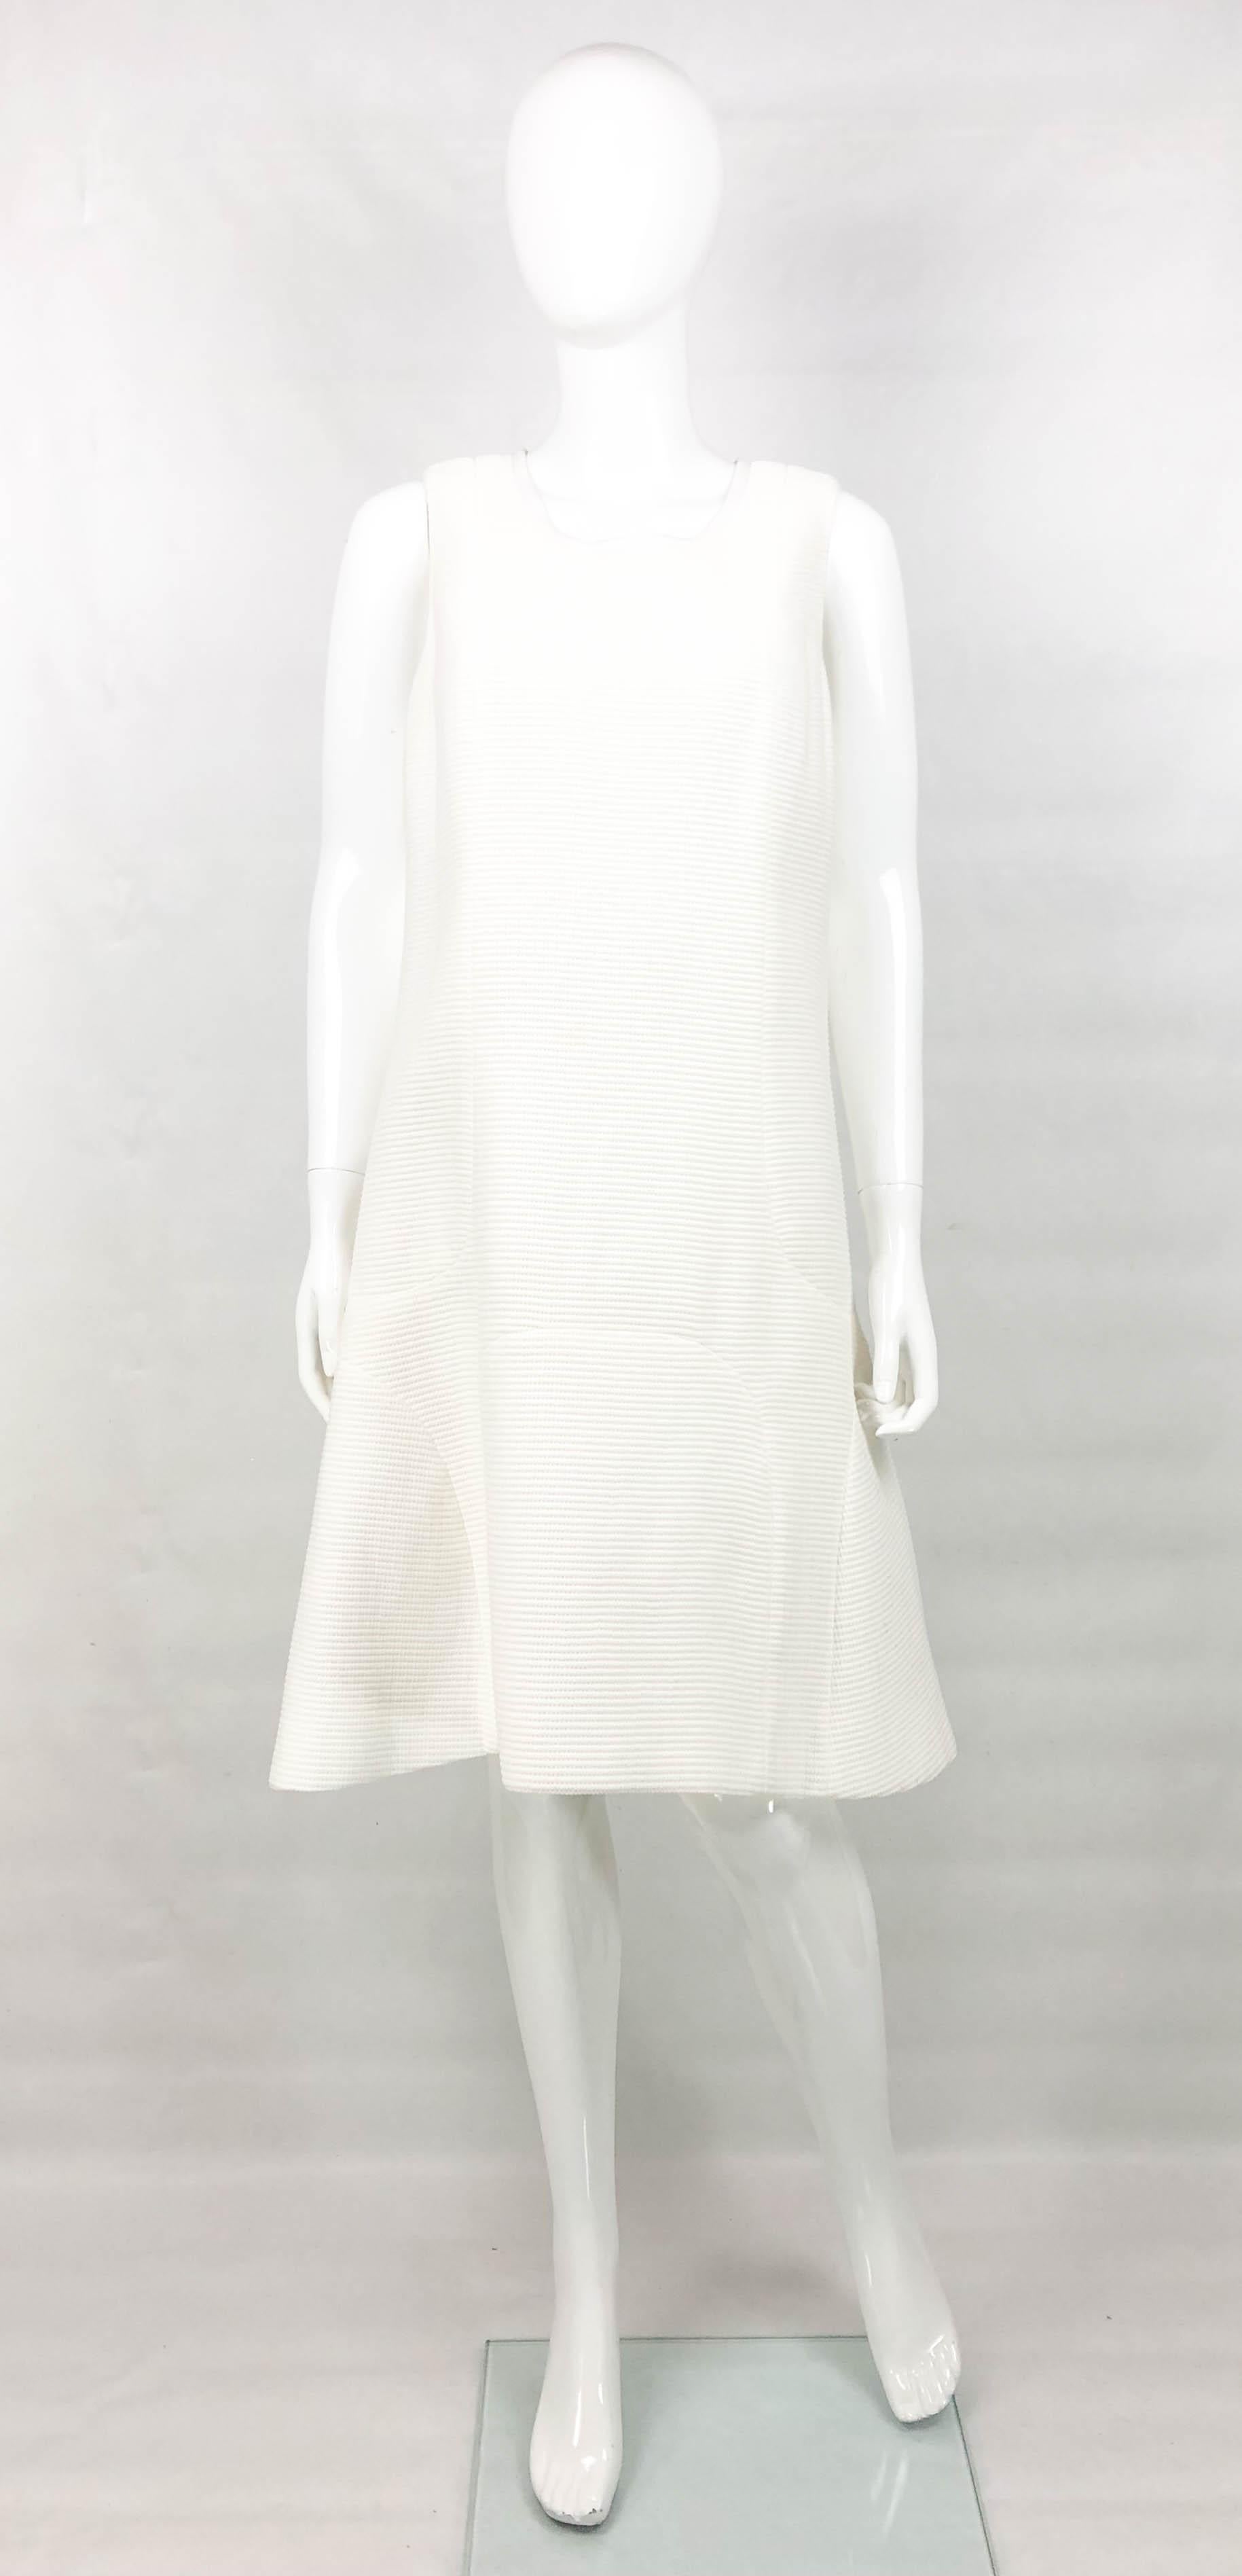 Chanel White Waffle Cotton Dress. Made in waffle textured cotton, this beautiful dress by Chanel is inspired by the 1960’s A-line silhouette. Sleeveless, it is lined in silk. A simple and timeless dress made for the effortless elegant woman. 

Label